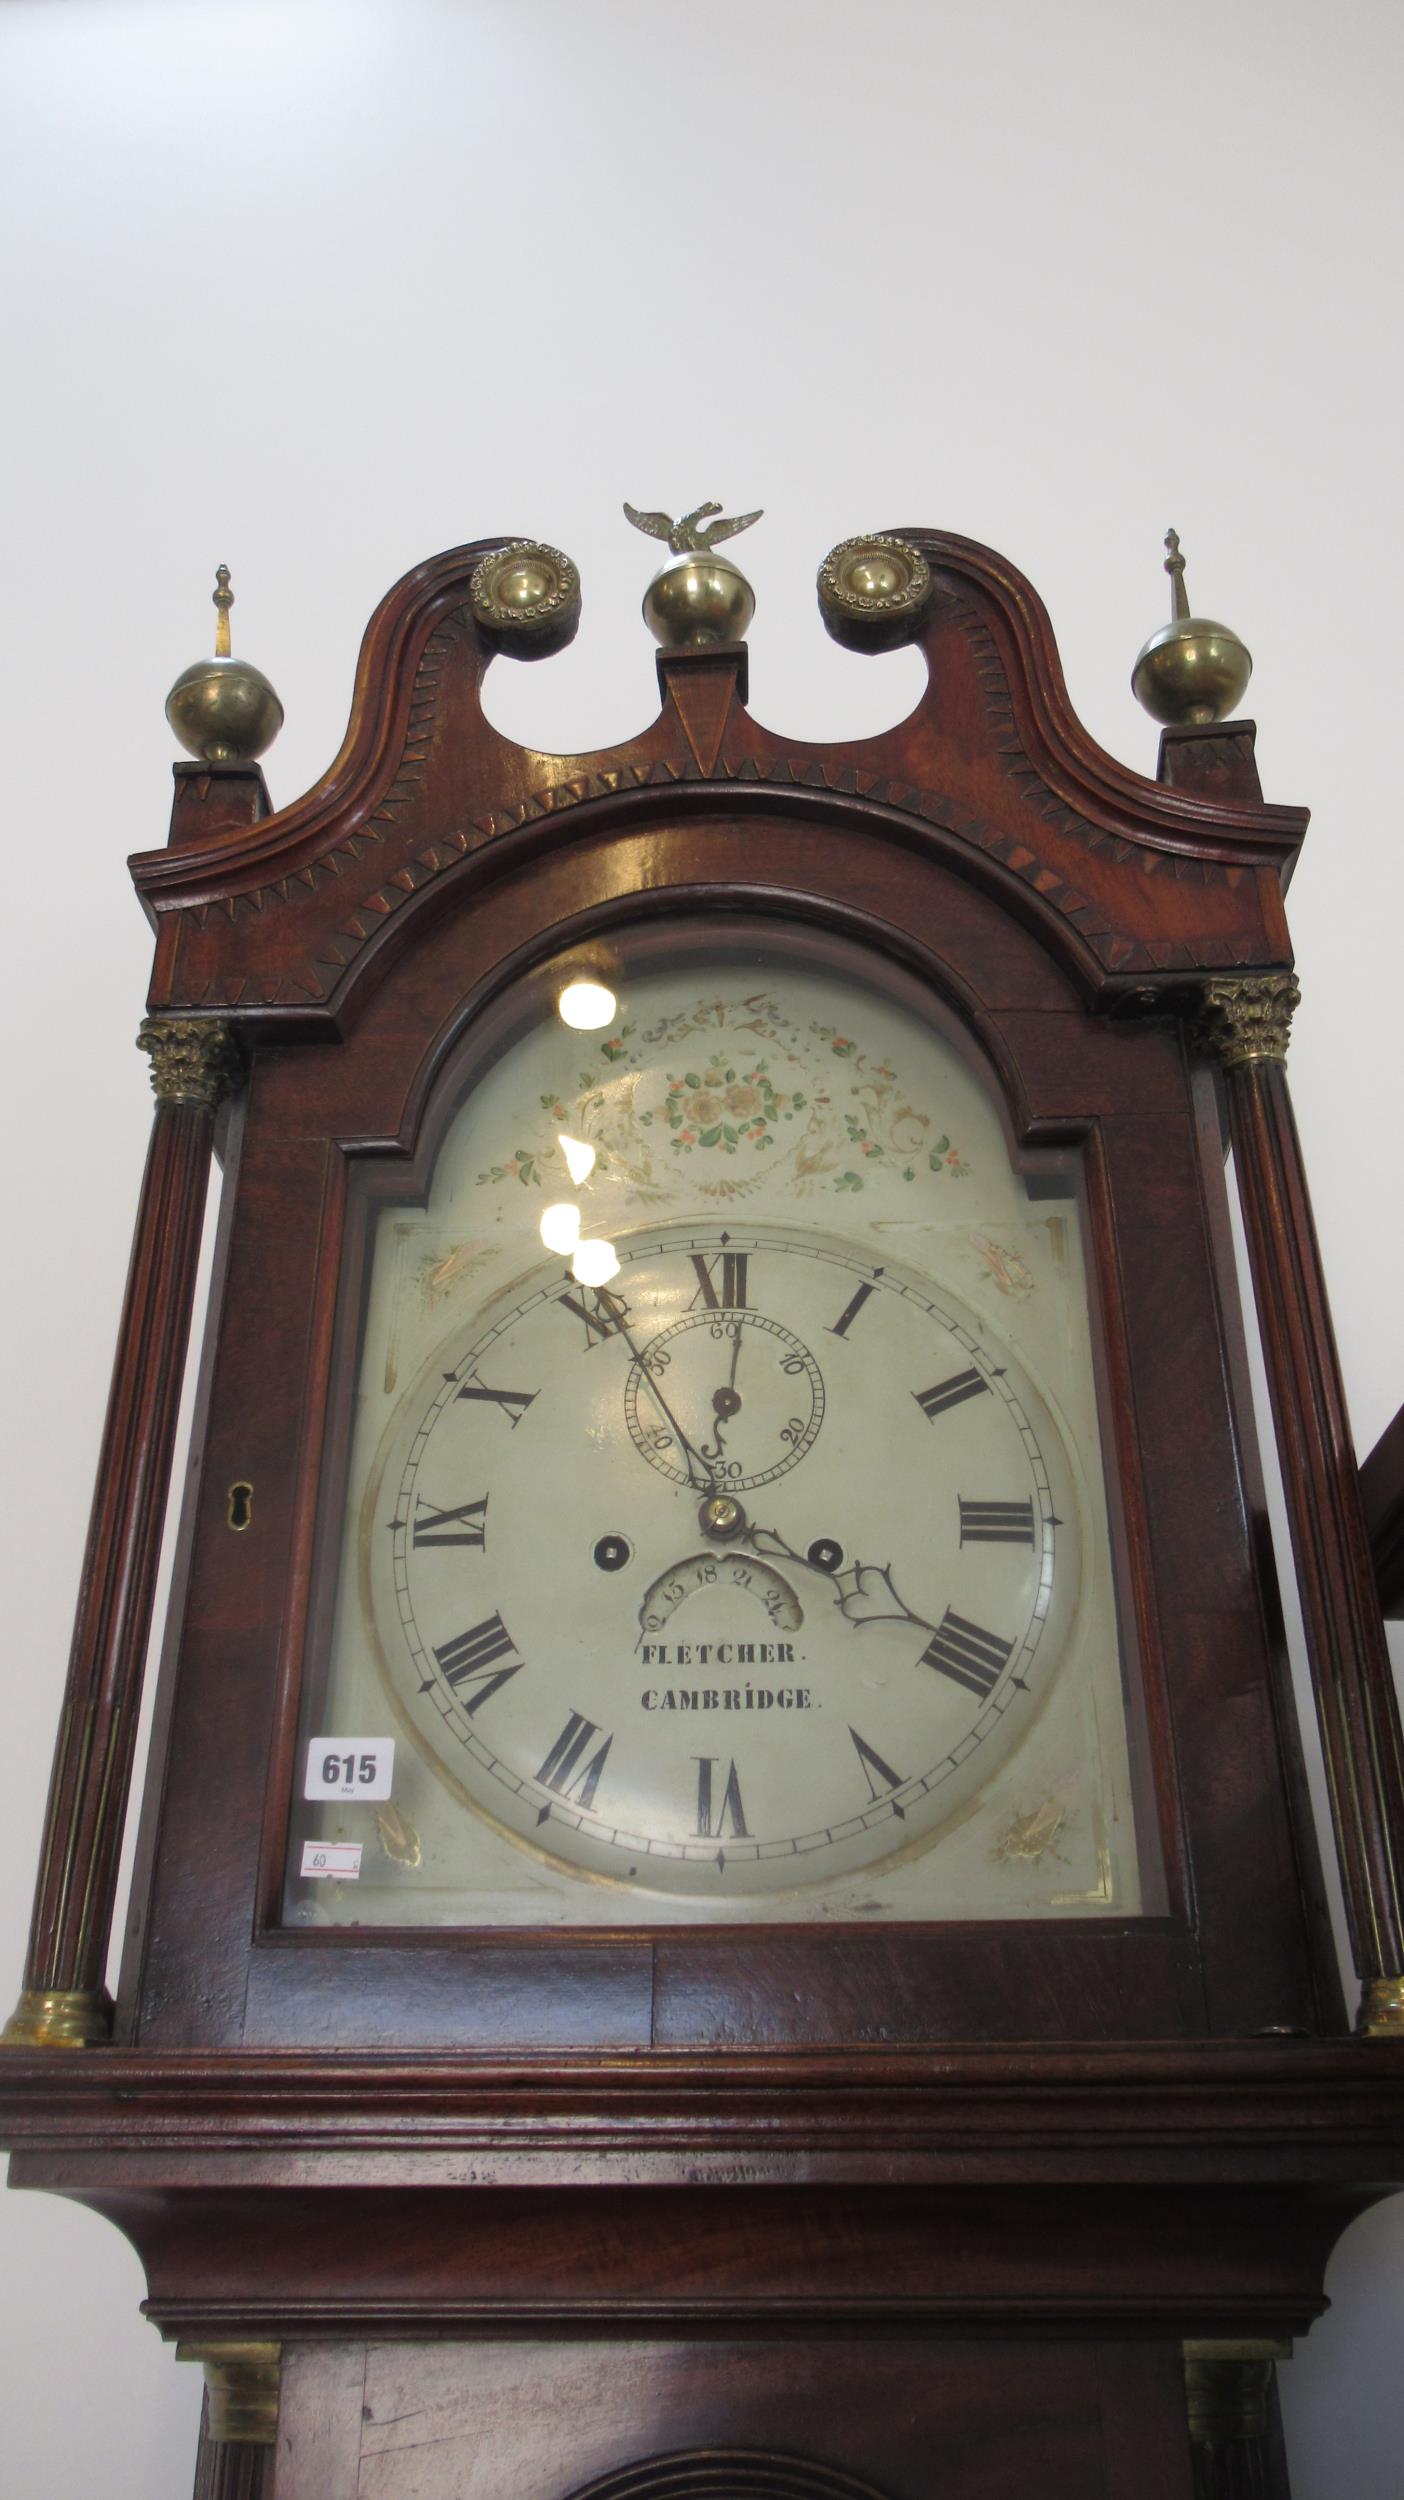 A longcase clock by Fletcher of Cambridge, 8 day movement in a mahogany case, roman numerals and